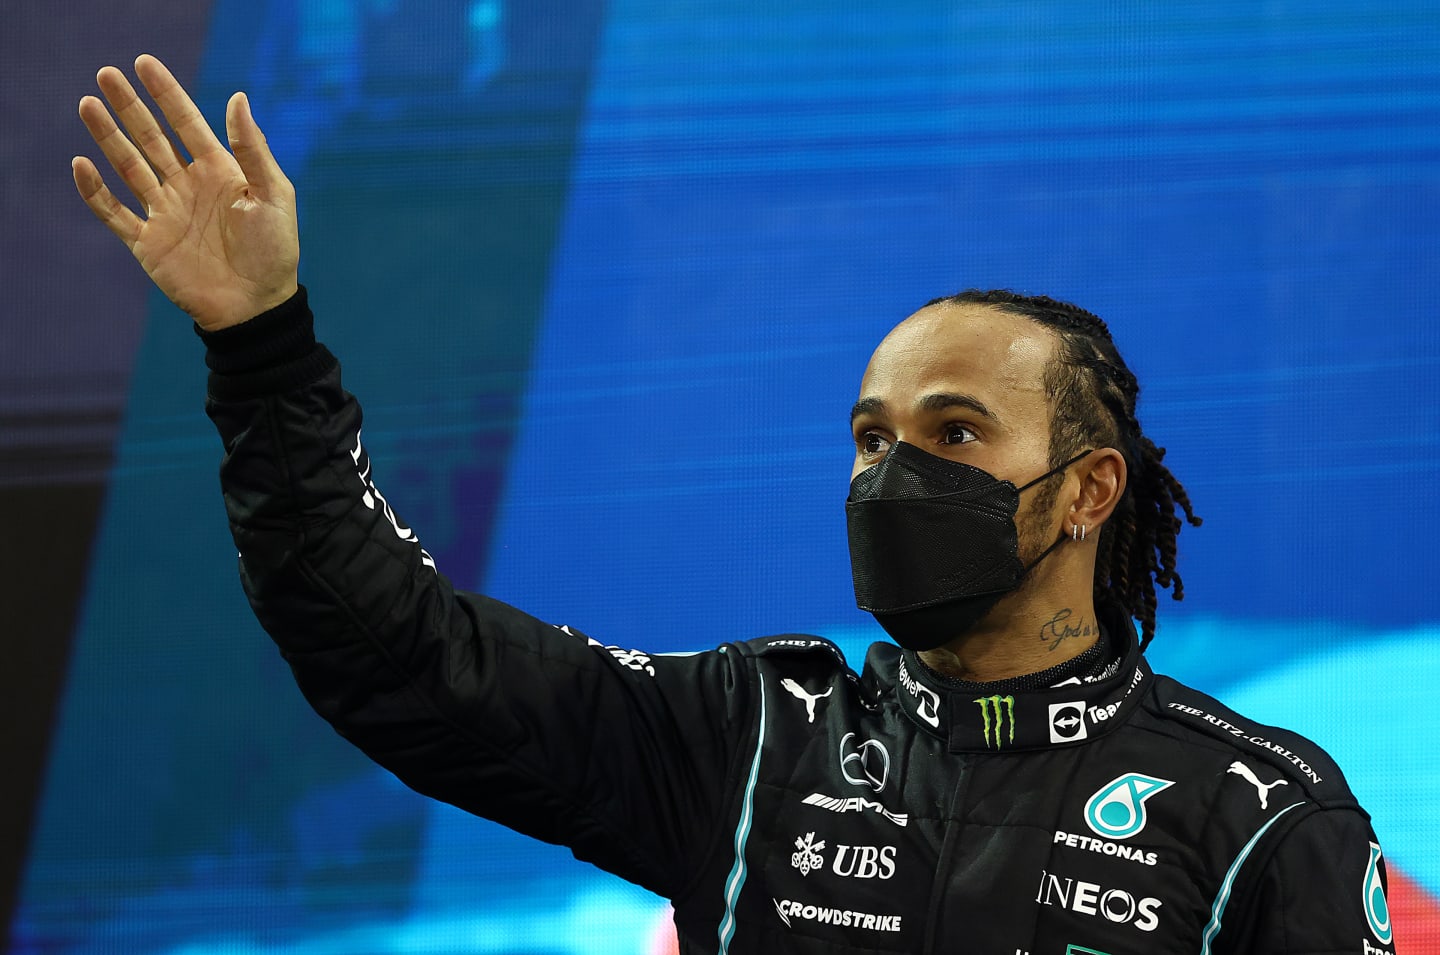 ABU DHABI, UNITED ARAB EMIRATES - DECEMBER 12: Second placed Lewis Hamilton of Great Britain and Mercedes GP waves from the podium during the F1 Grand Prix of Abu Dhabi at Yas Marina Circuit on December 12, 2021 in Abu Dhabi, United Arab Emirates. (Photo by Bryn Lennon/Getty Images)